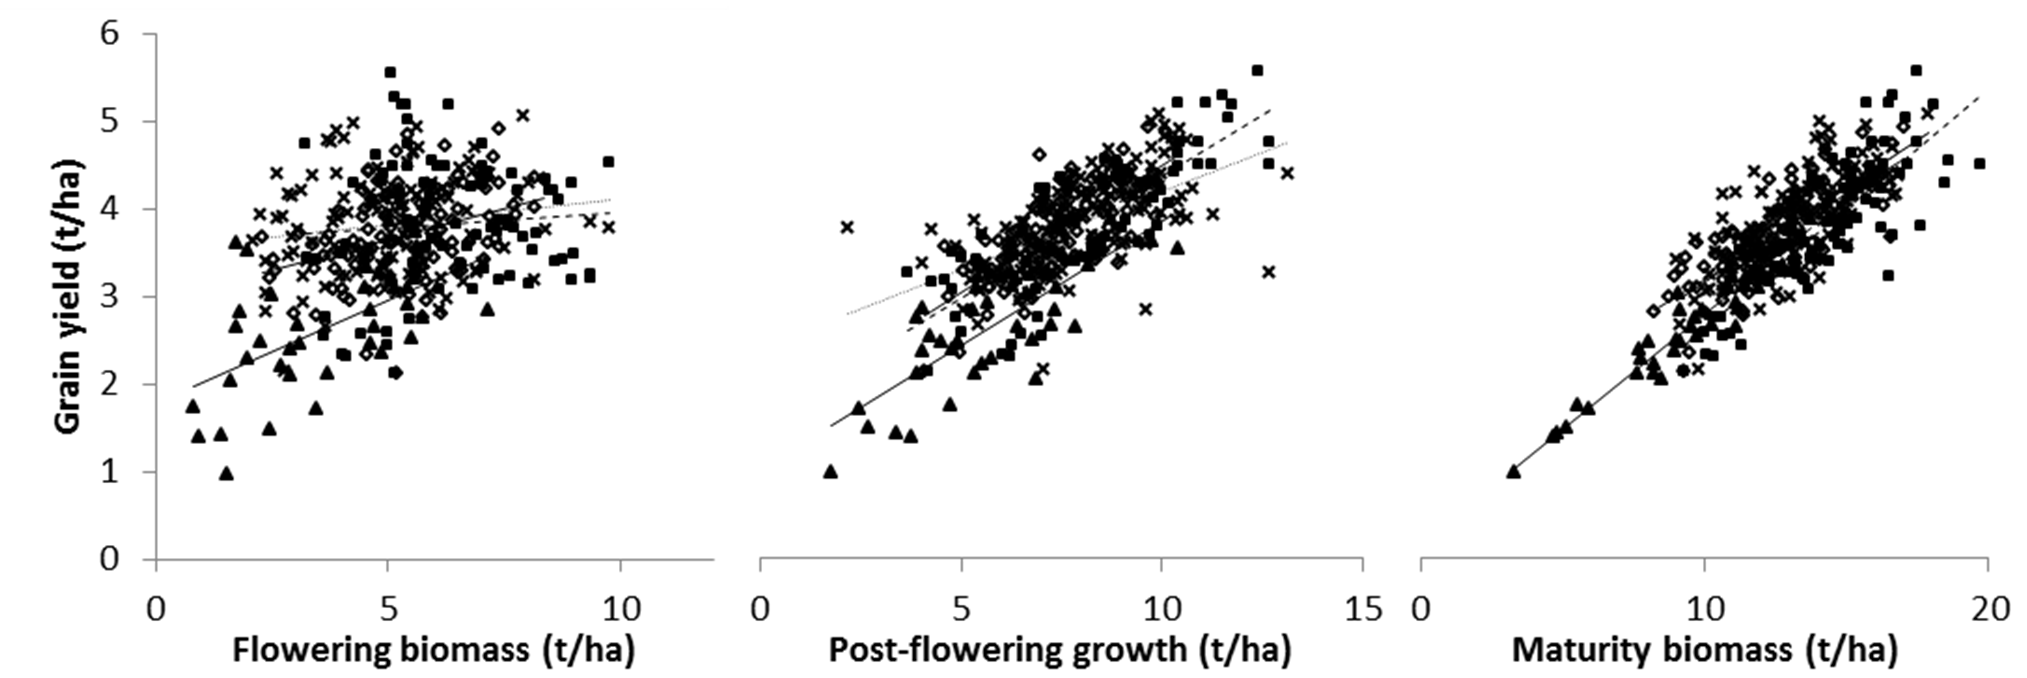 Figure 2. Relationship between grain yield and biomass at flowering, growth post-flowering and biomass at maturity in canola trials at Wagga Wagga (×), Finley (▪), Ganmain (▲) and Condobolin (◊) in 2016.